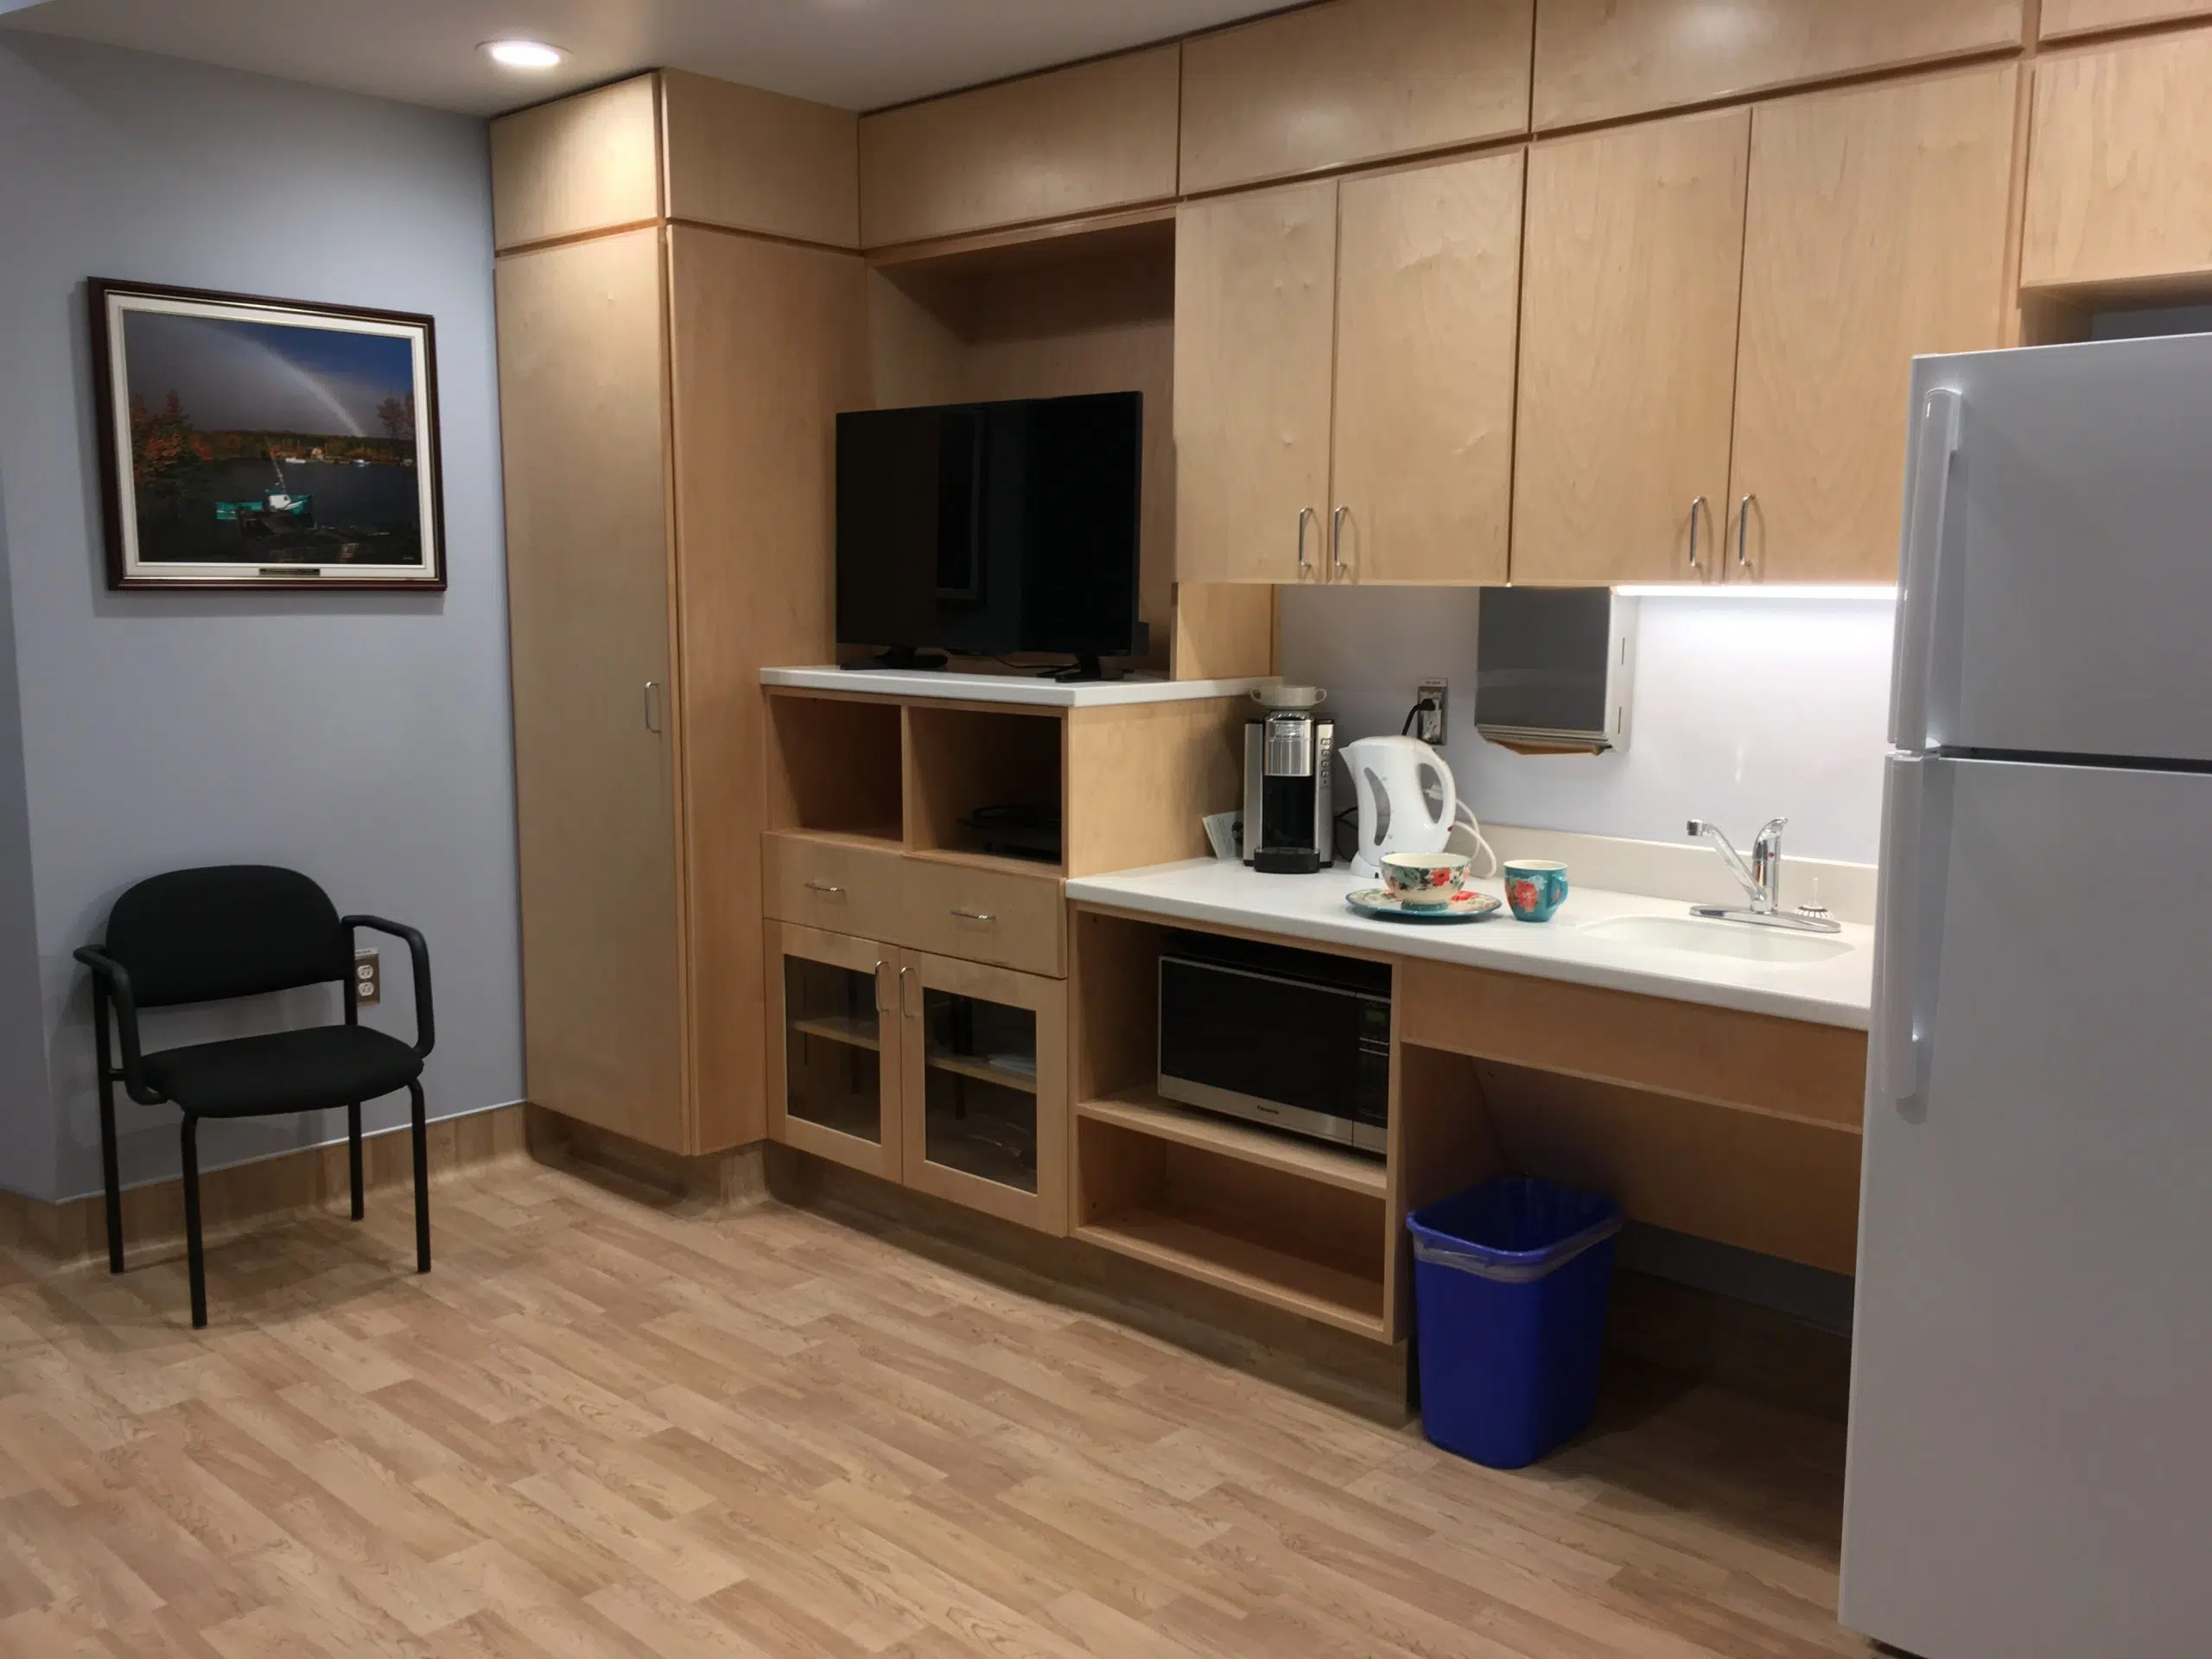 Warden says palliative care family room is great addition to Inverness hospital